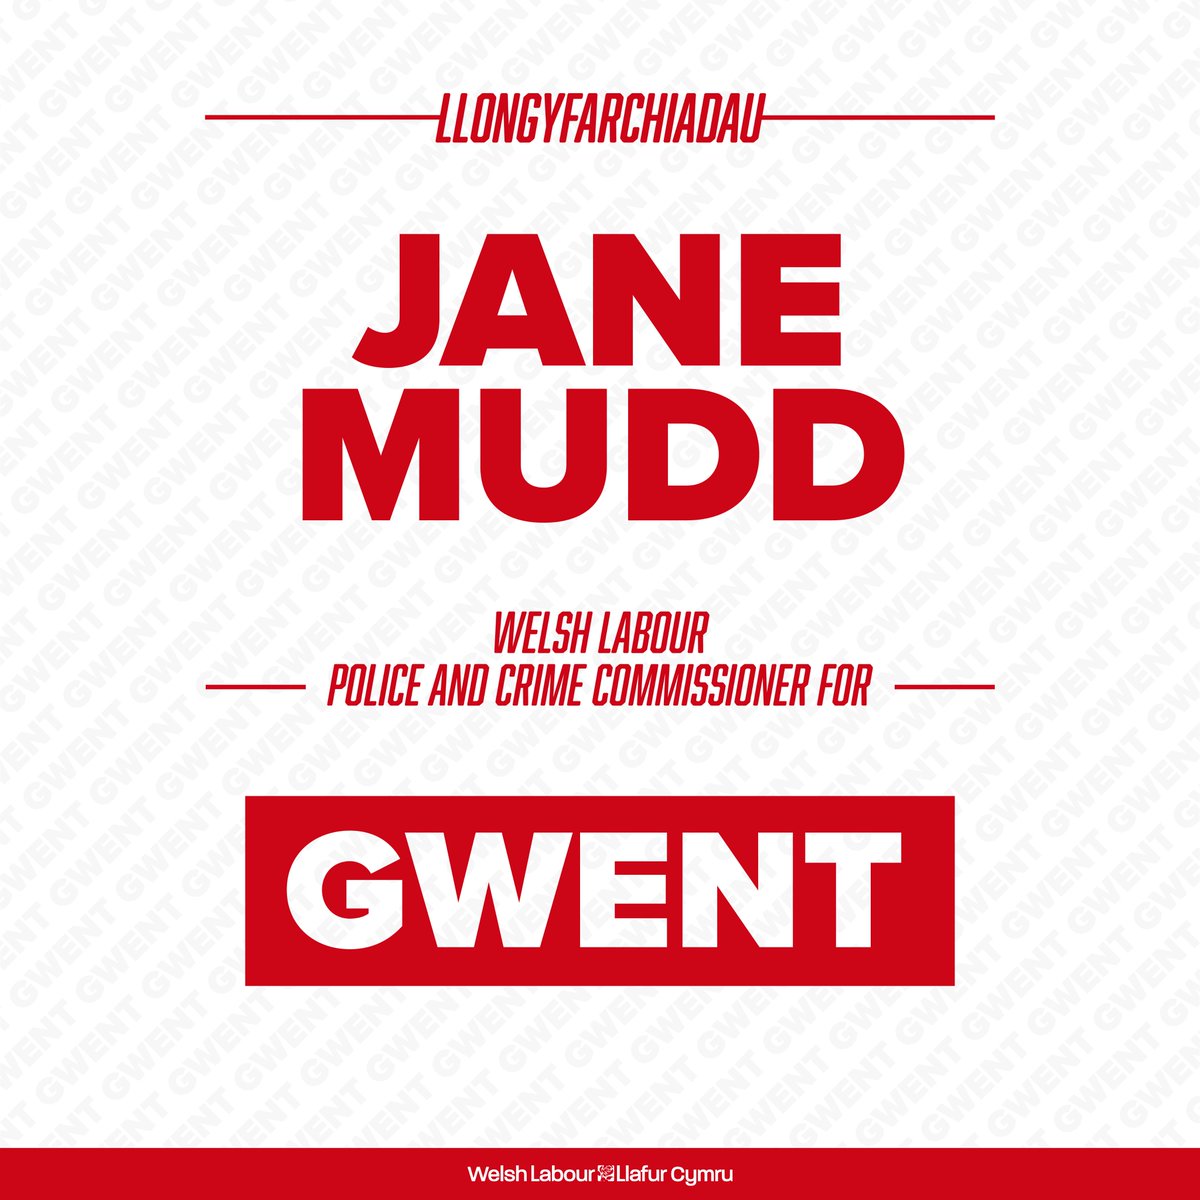 Welsh Labour HOLD. Congratulations to @jane_mudd, who has been elected as the Welsh Labour Police and Crime Commissioner for Gwent.